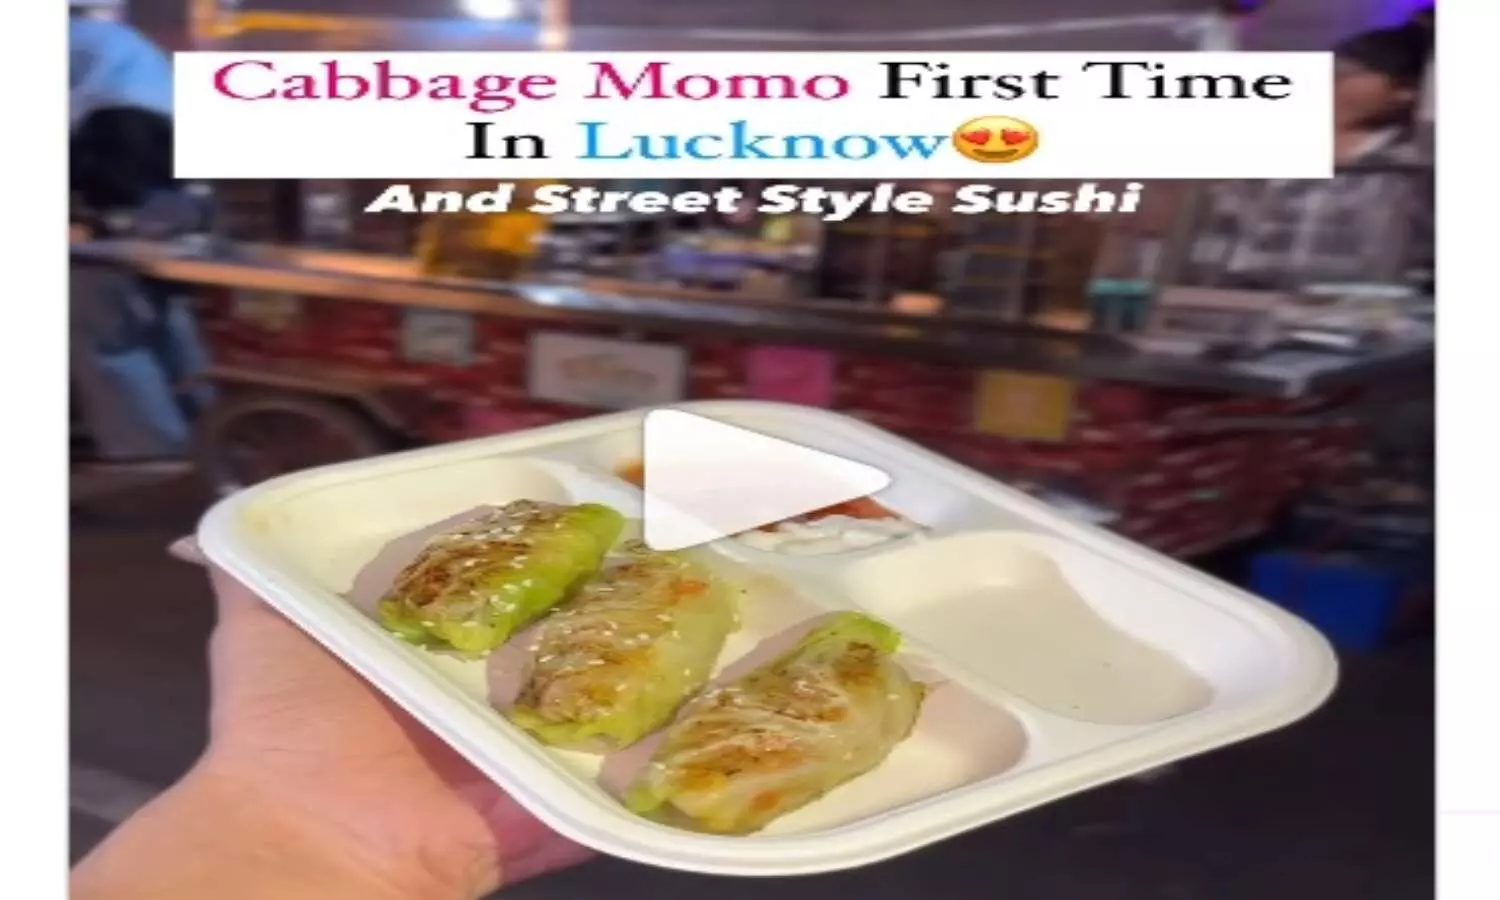 Cabbage Momos First Time In Lucknow